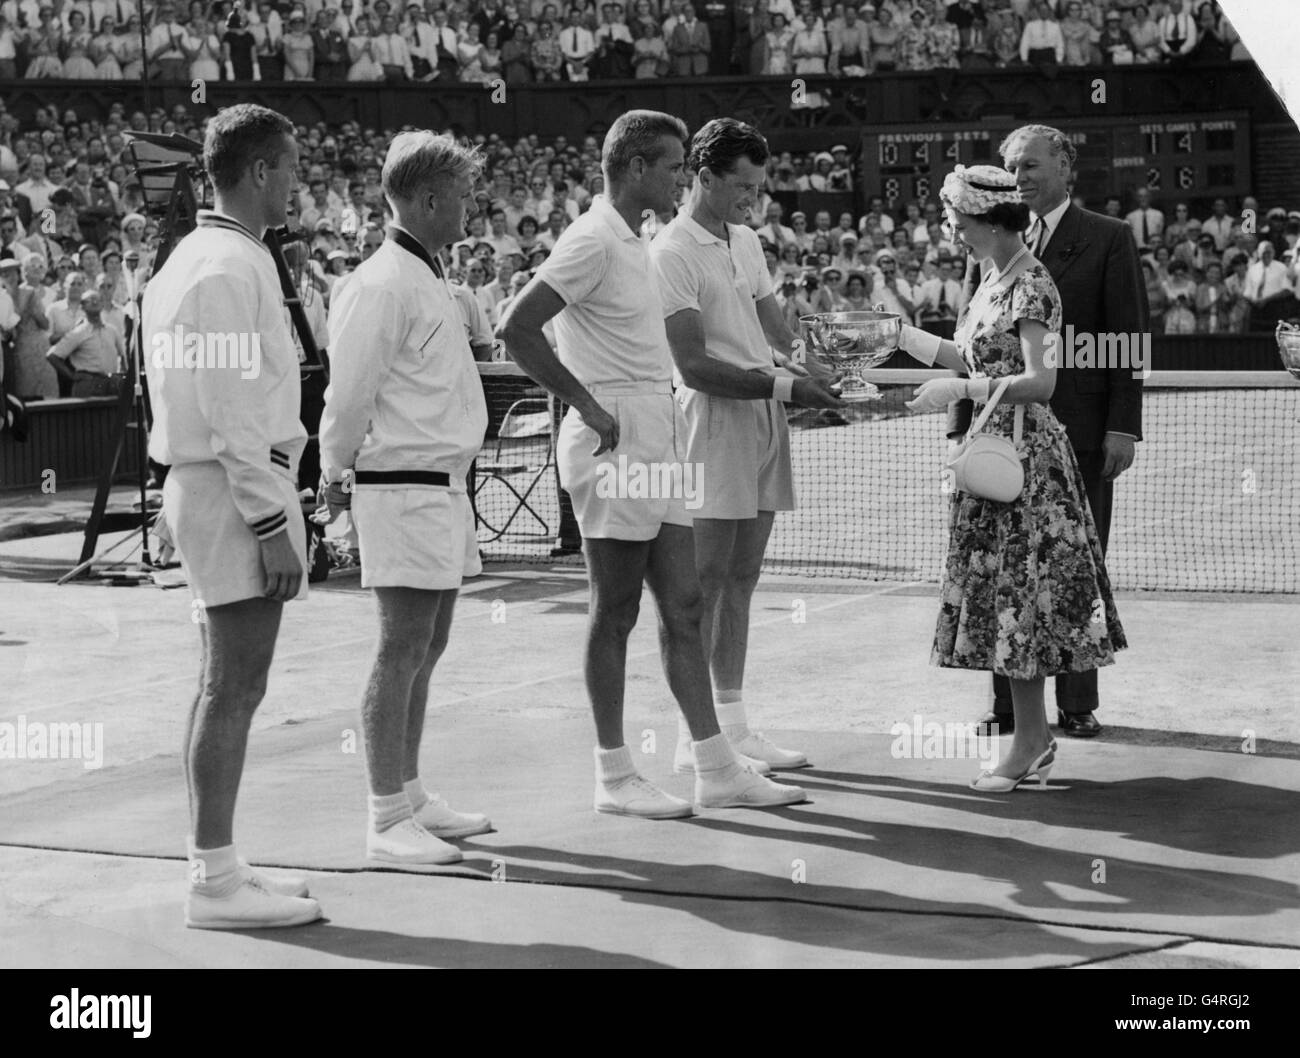 Queen Elizabeth II presenting the Men's Doubles Final trophy at Wimbledon.  The American pair Gardner Mulloy and Budge Patty beat the Australian pair  Neil Fraser and Lew Road Stock Photo - Alamy